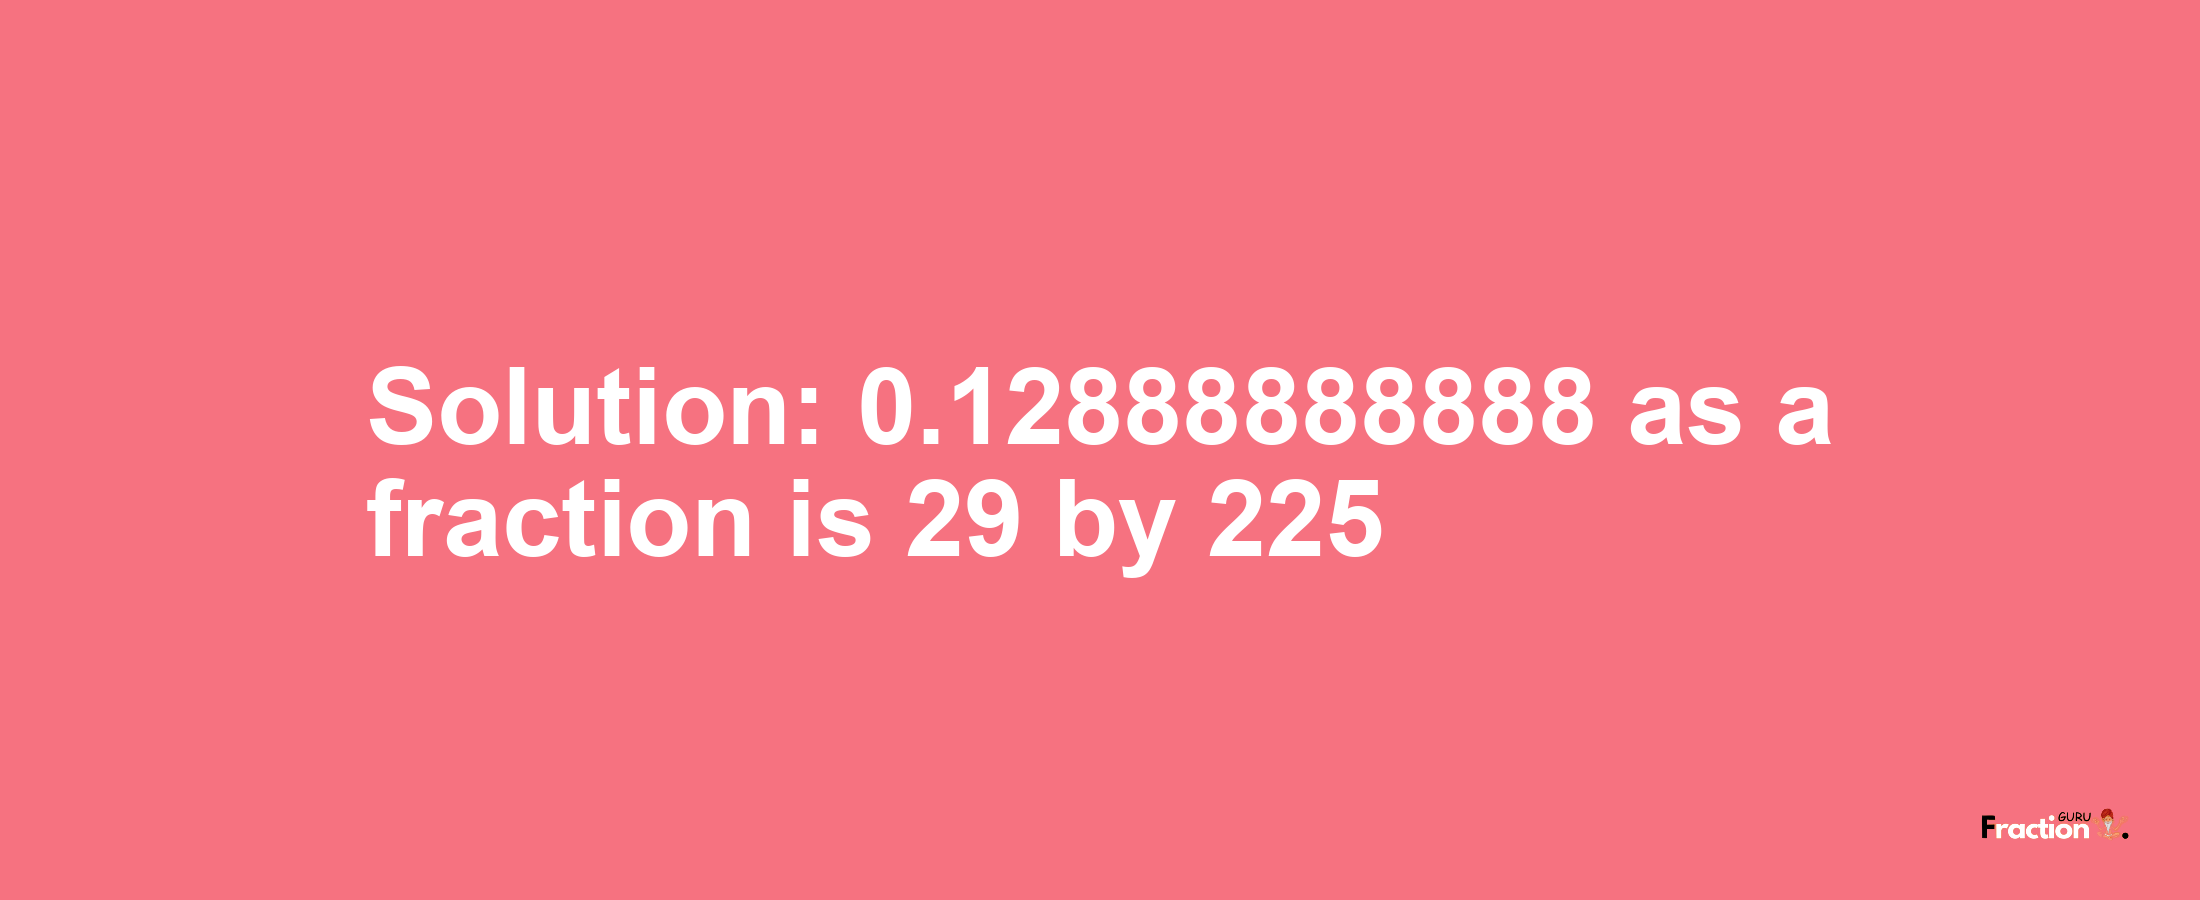 Solution:0.12888888888 as a fraction is 29/225